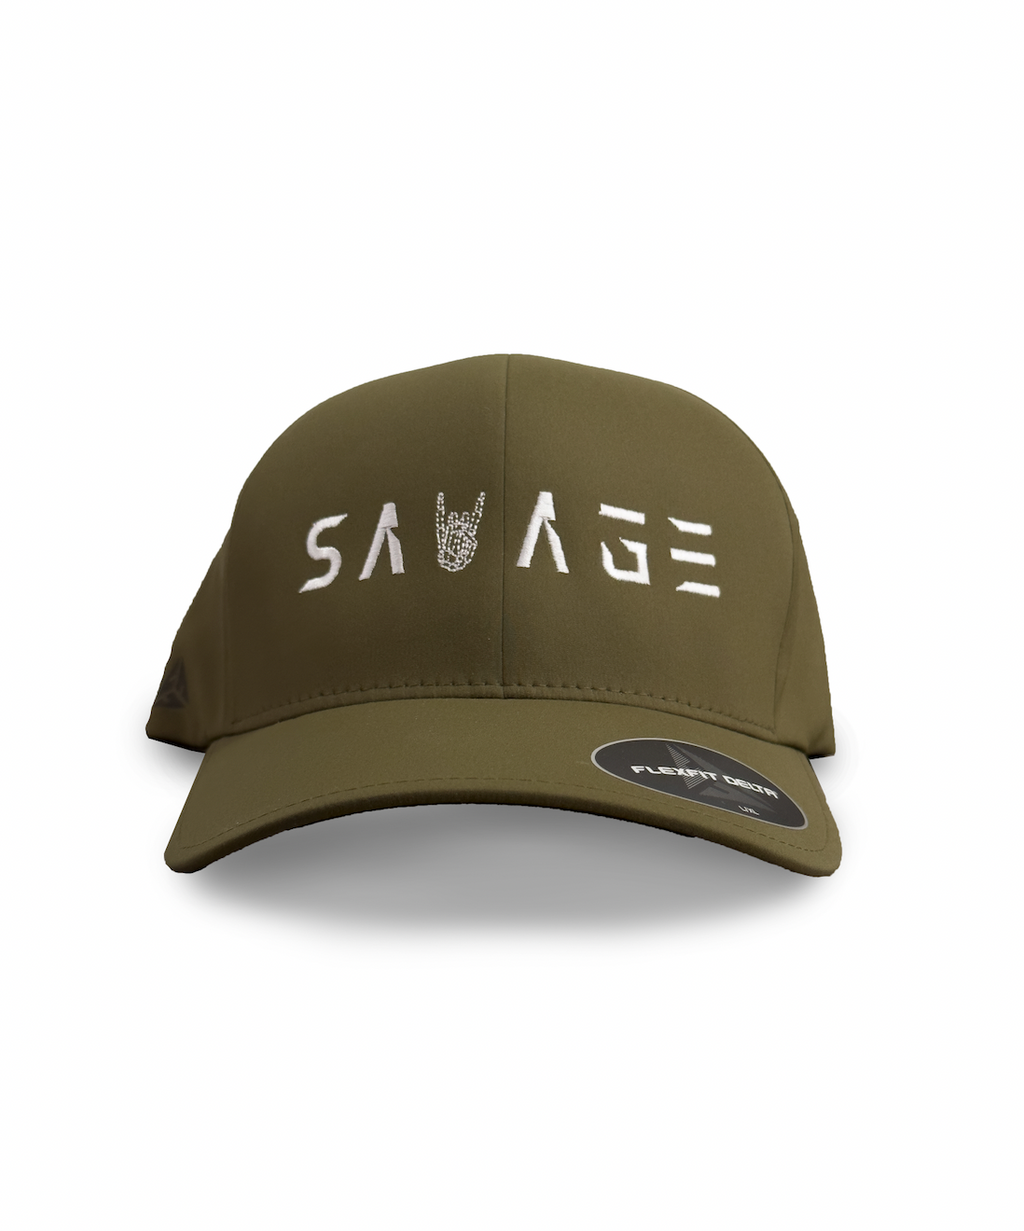 Fitted Performance Cap (SAVAGE)